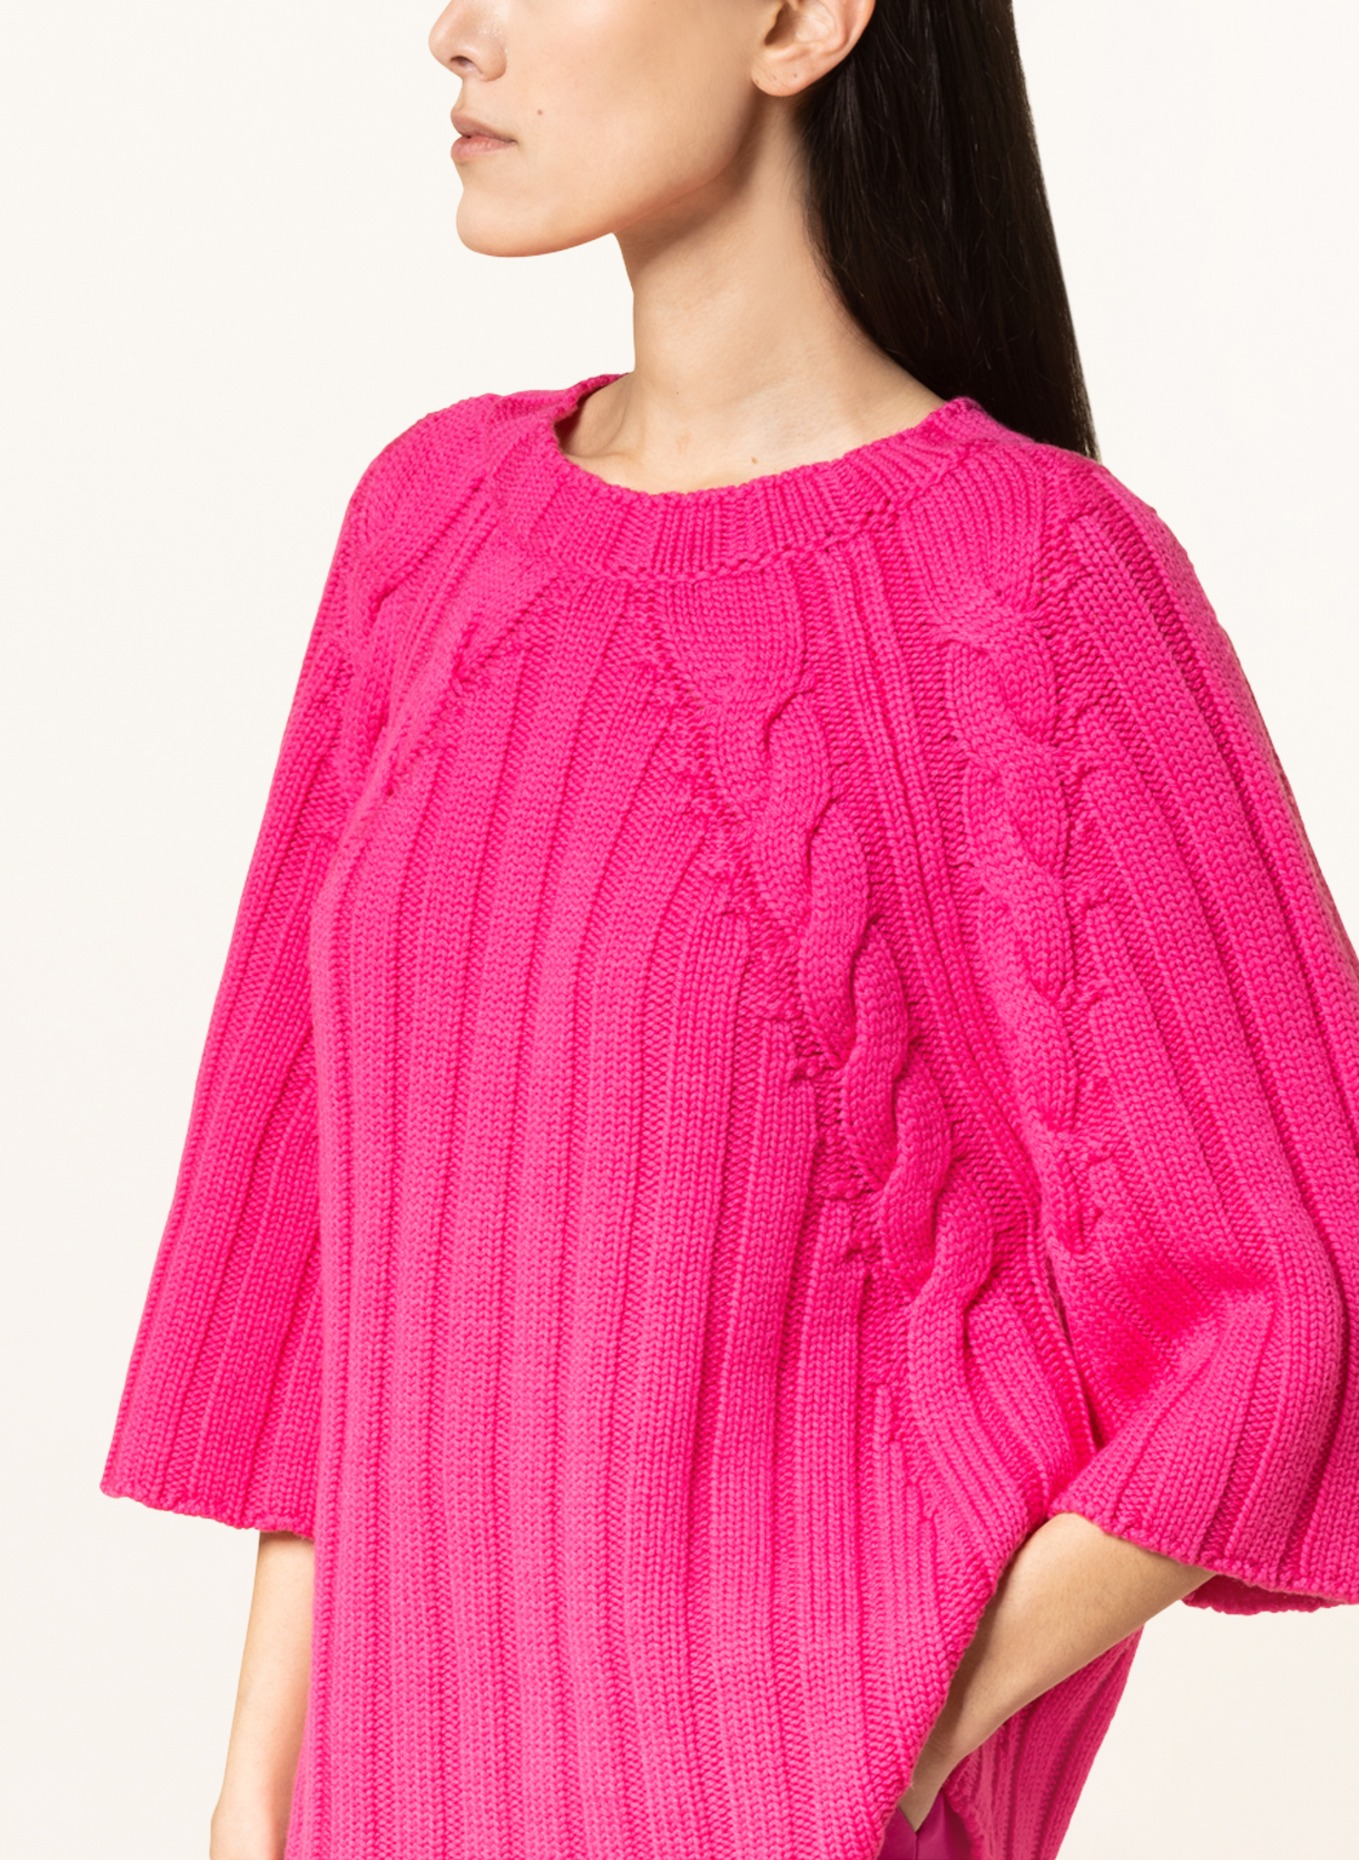 FABIANA FILIPPI Sweater made of merino wool with 3/4 sleeves, Color: PINK (Image 4)